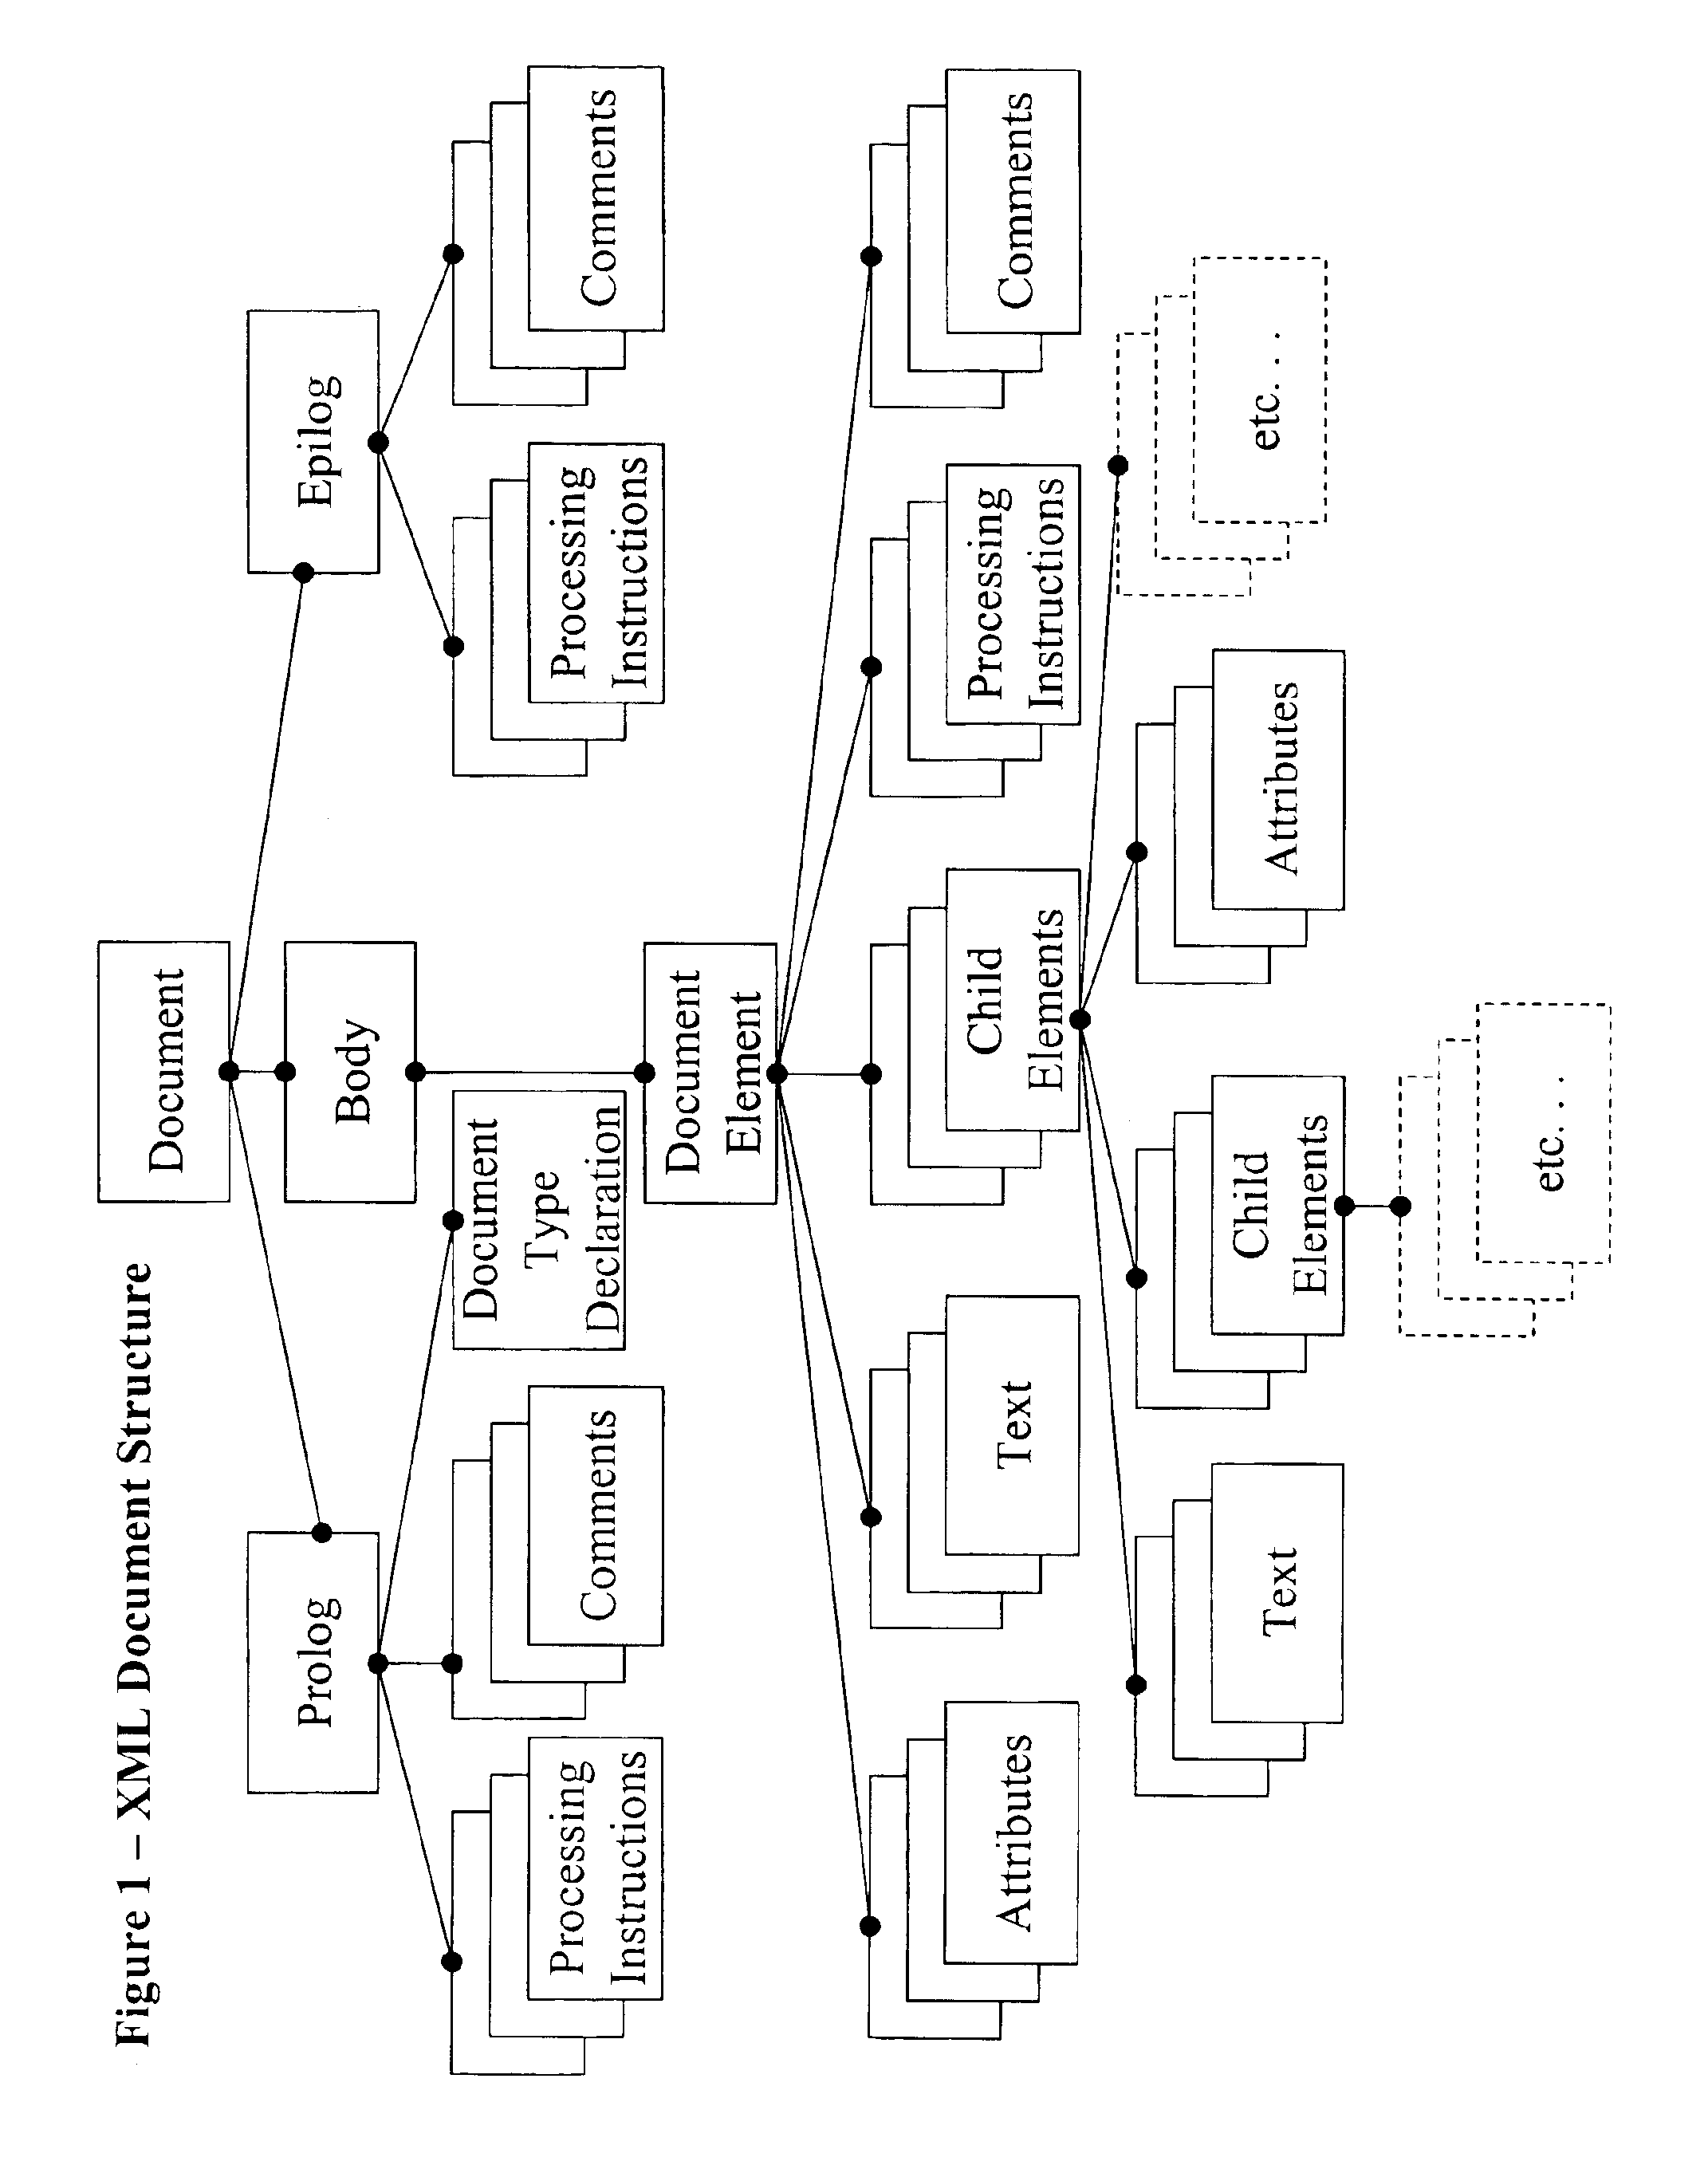 System and method for converting an XML data structure into a relational database